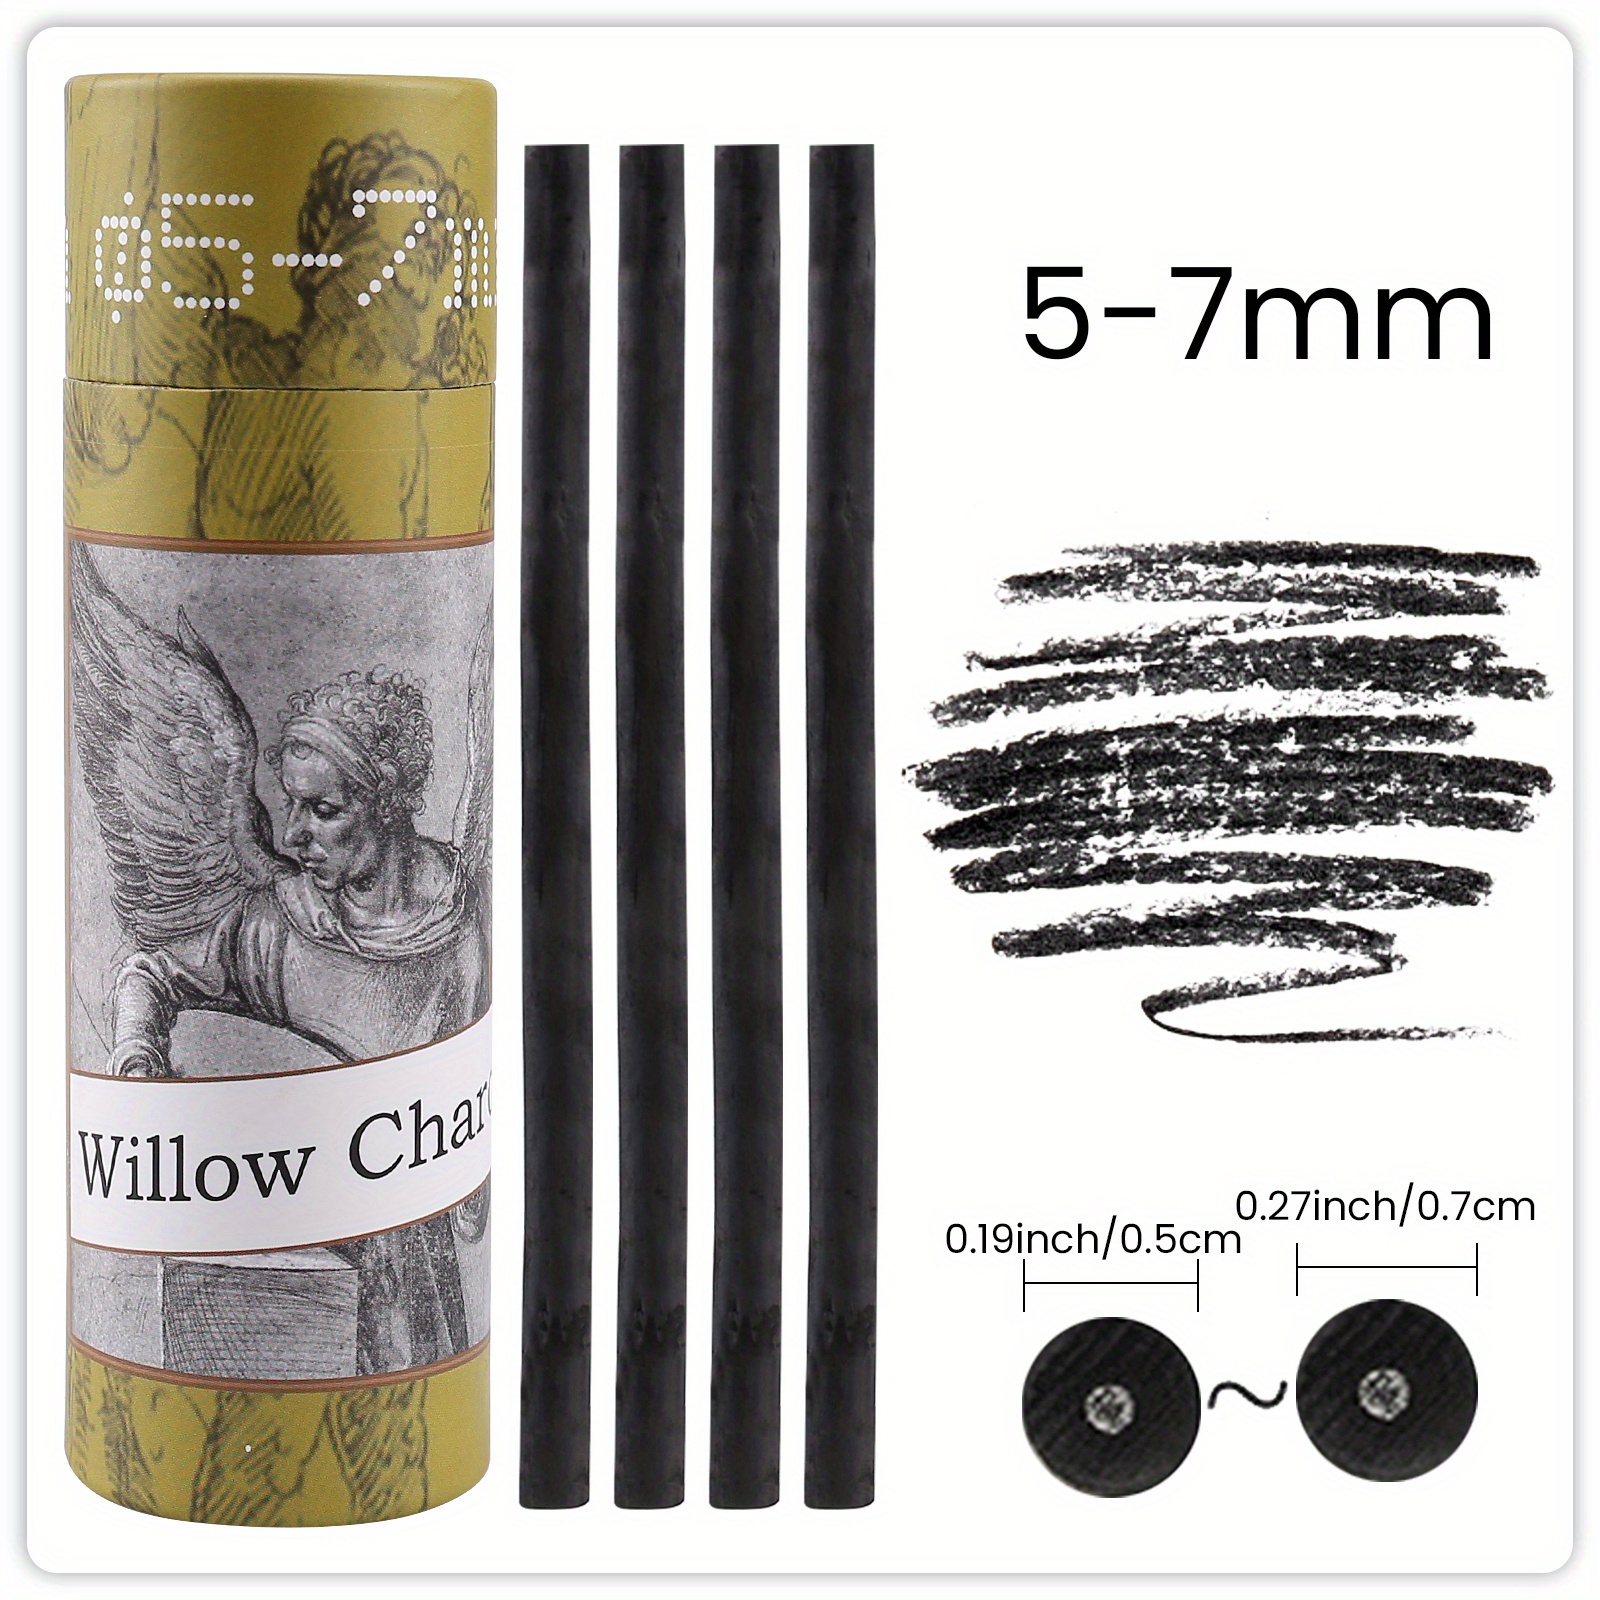 Willow Charcoal Set 30-Count